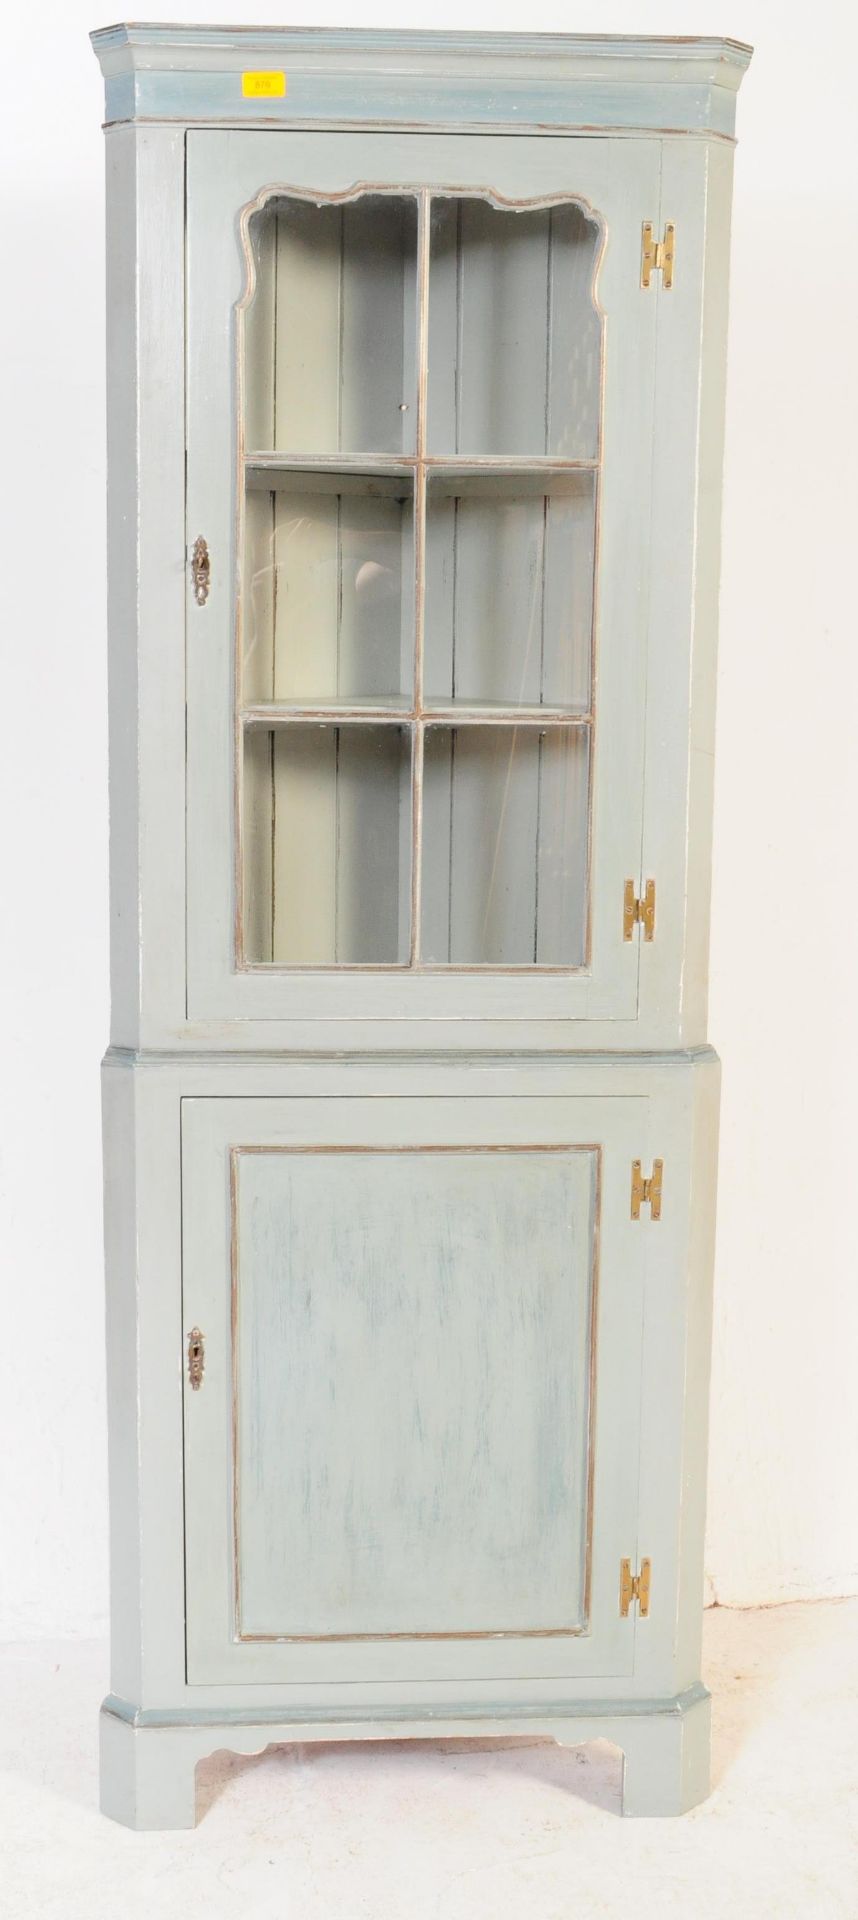 EARLY 20TH CENTURY PAINTED CORNER CABINET - Image 2 of 6